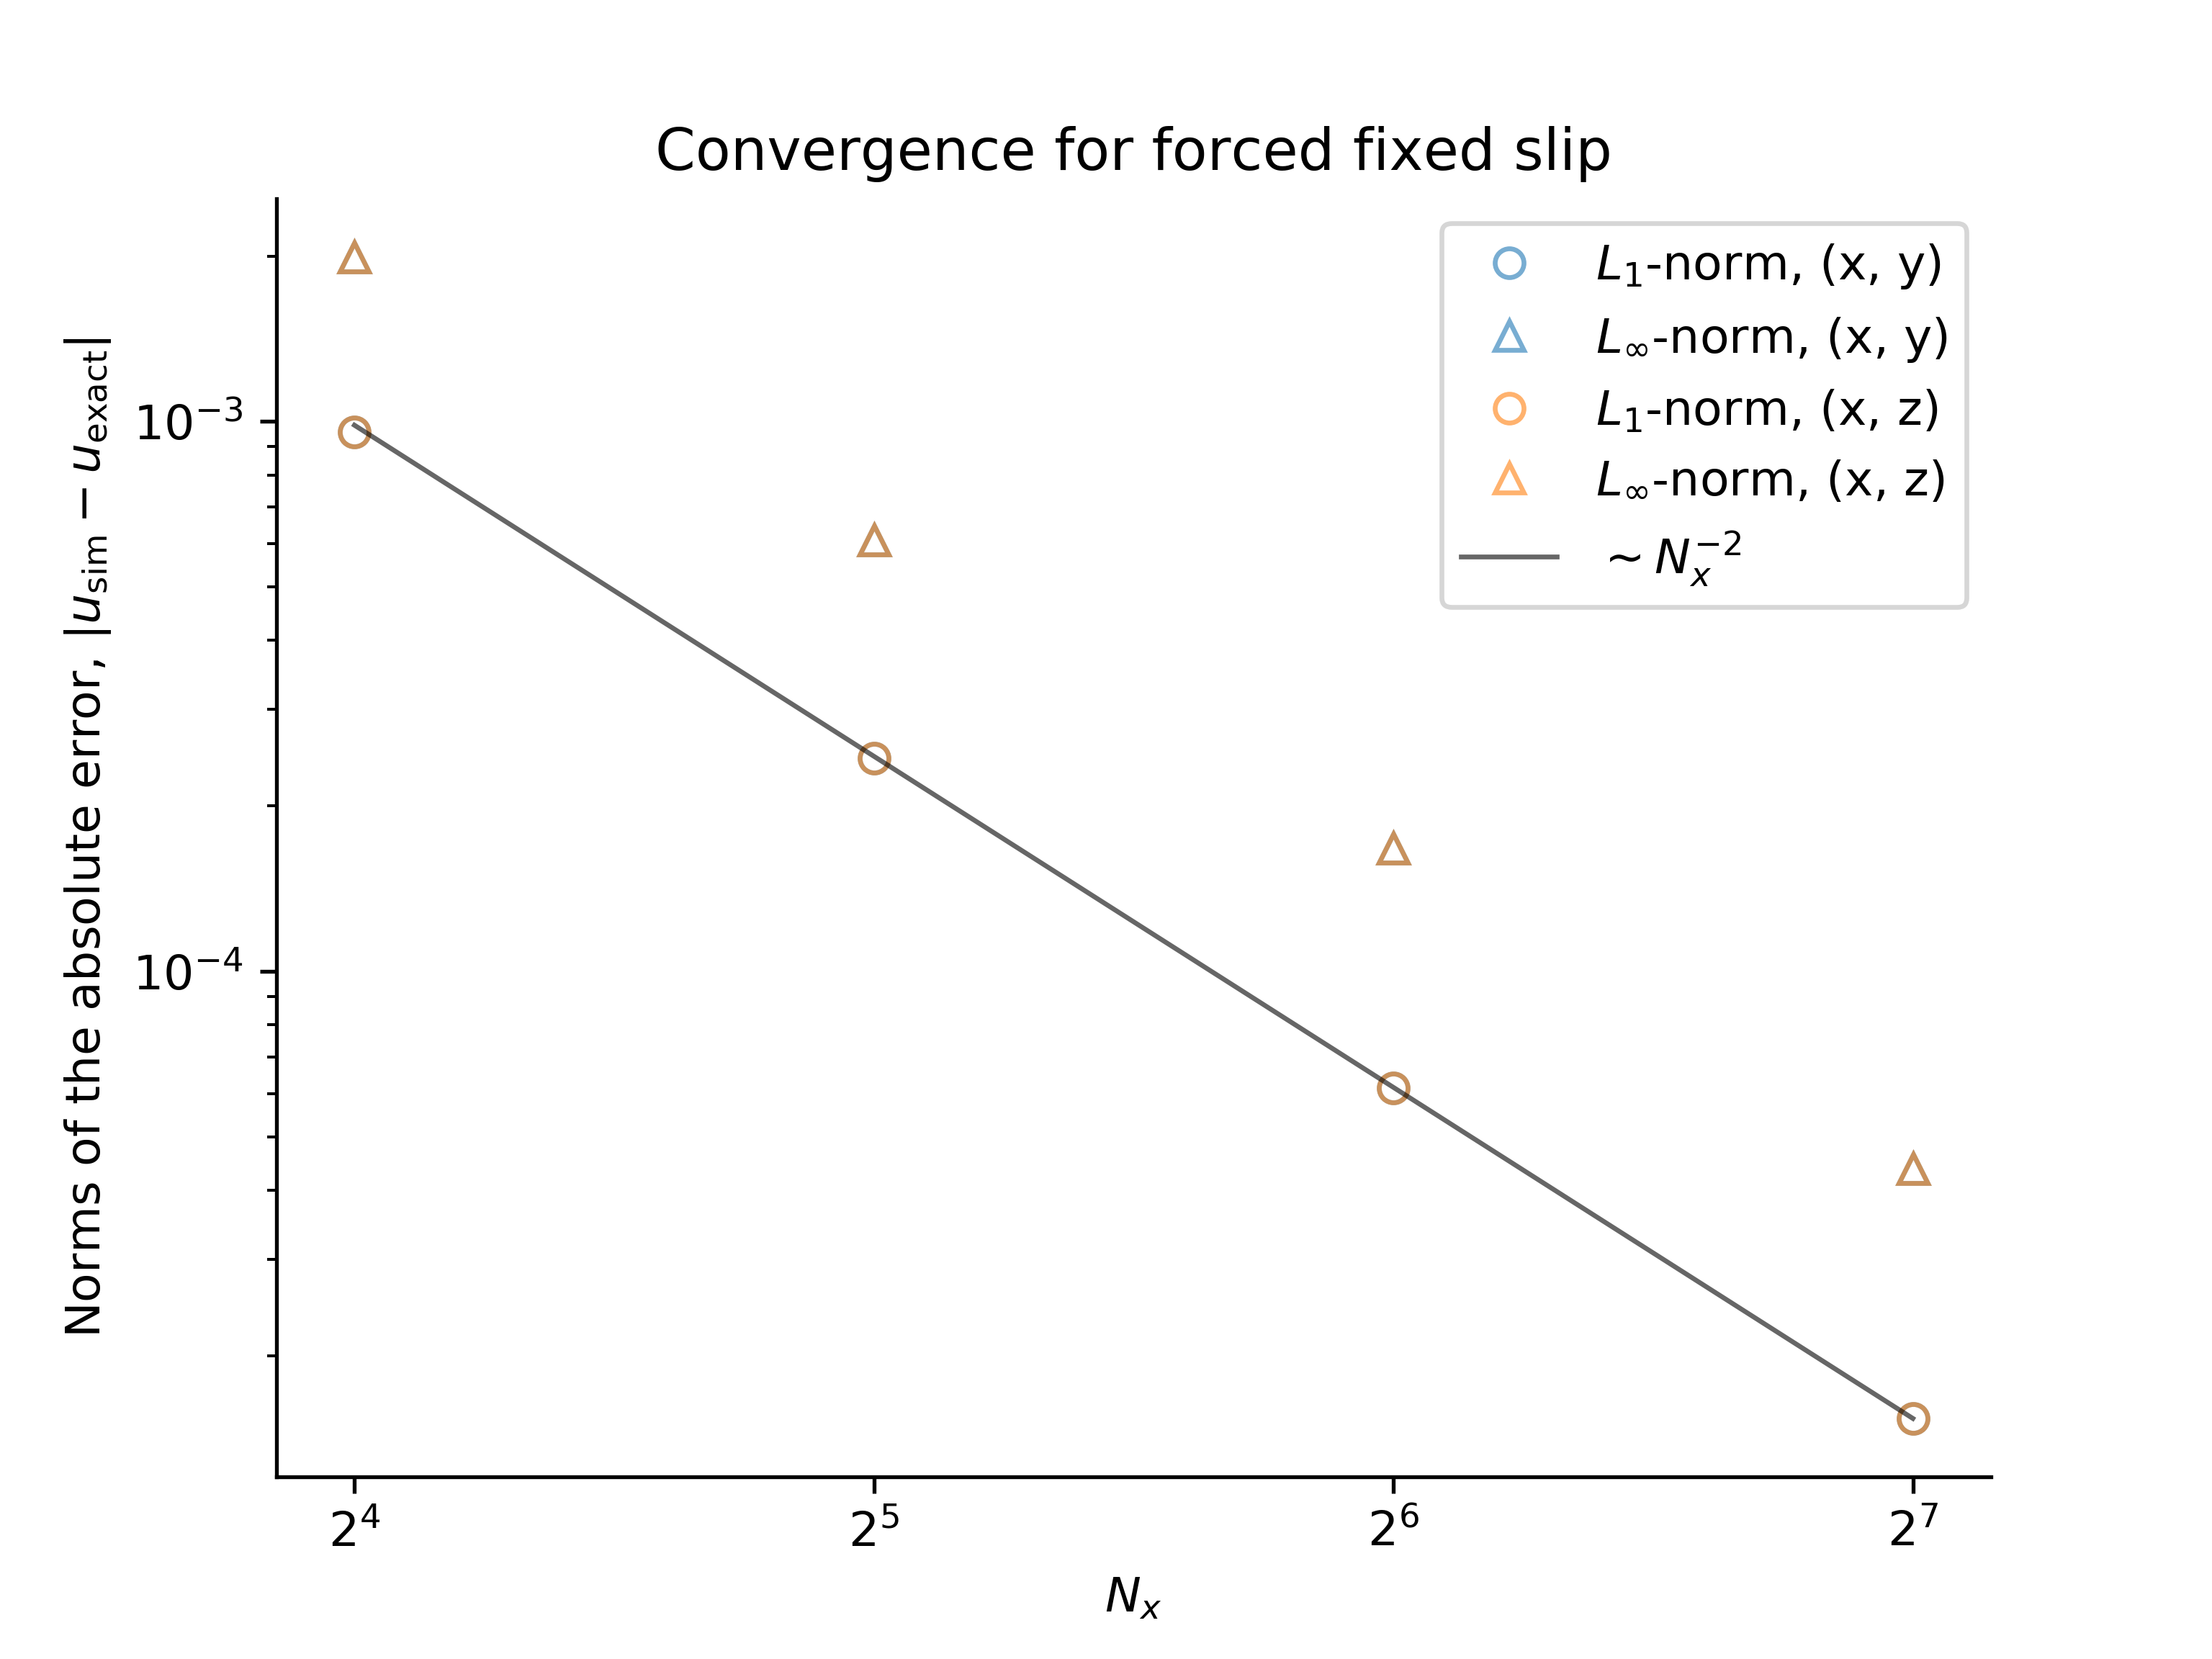 Forced fixed slip convergence